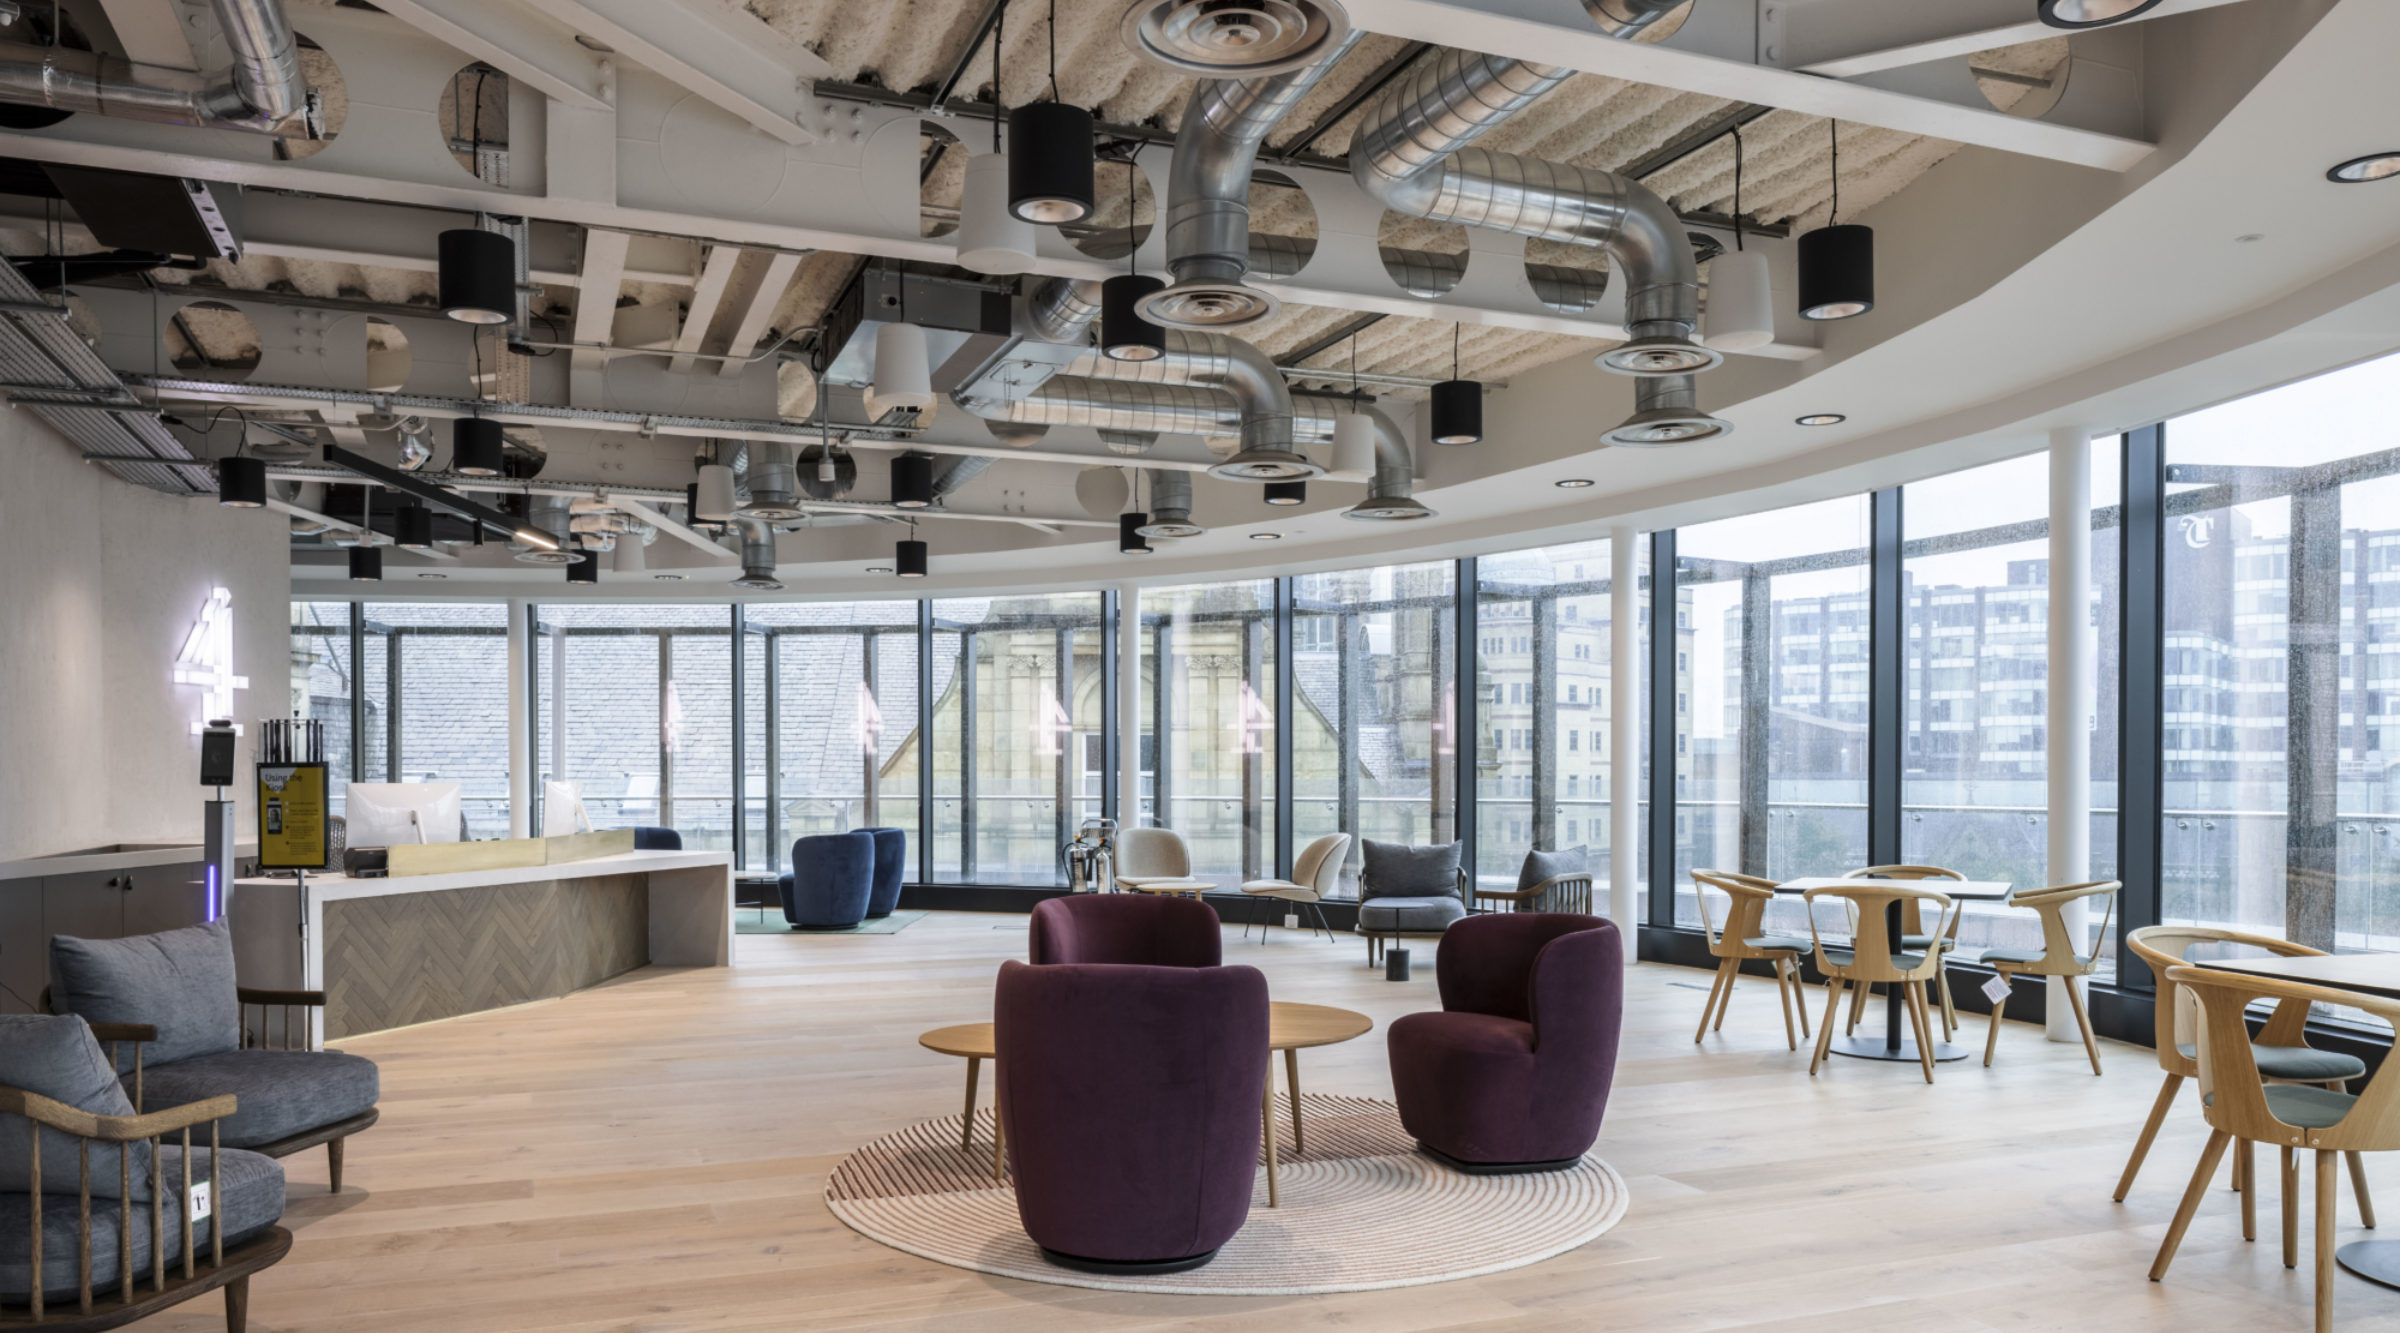 Channel 4 office fit out by Overbury